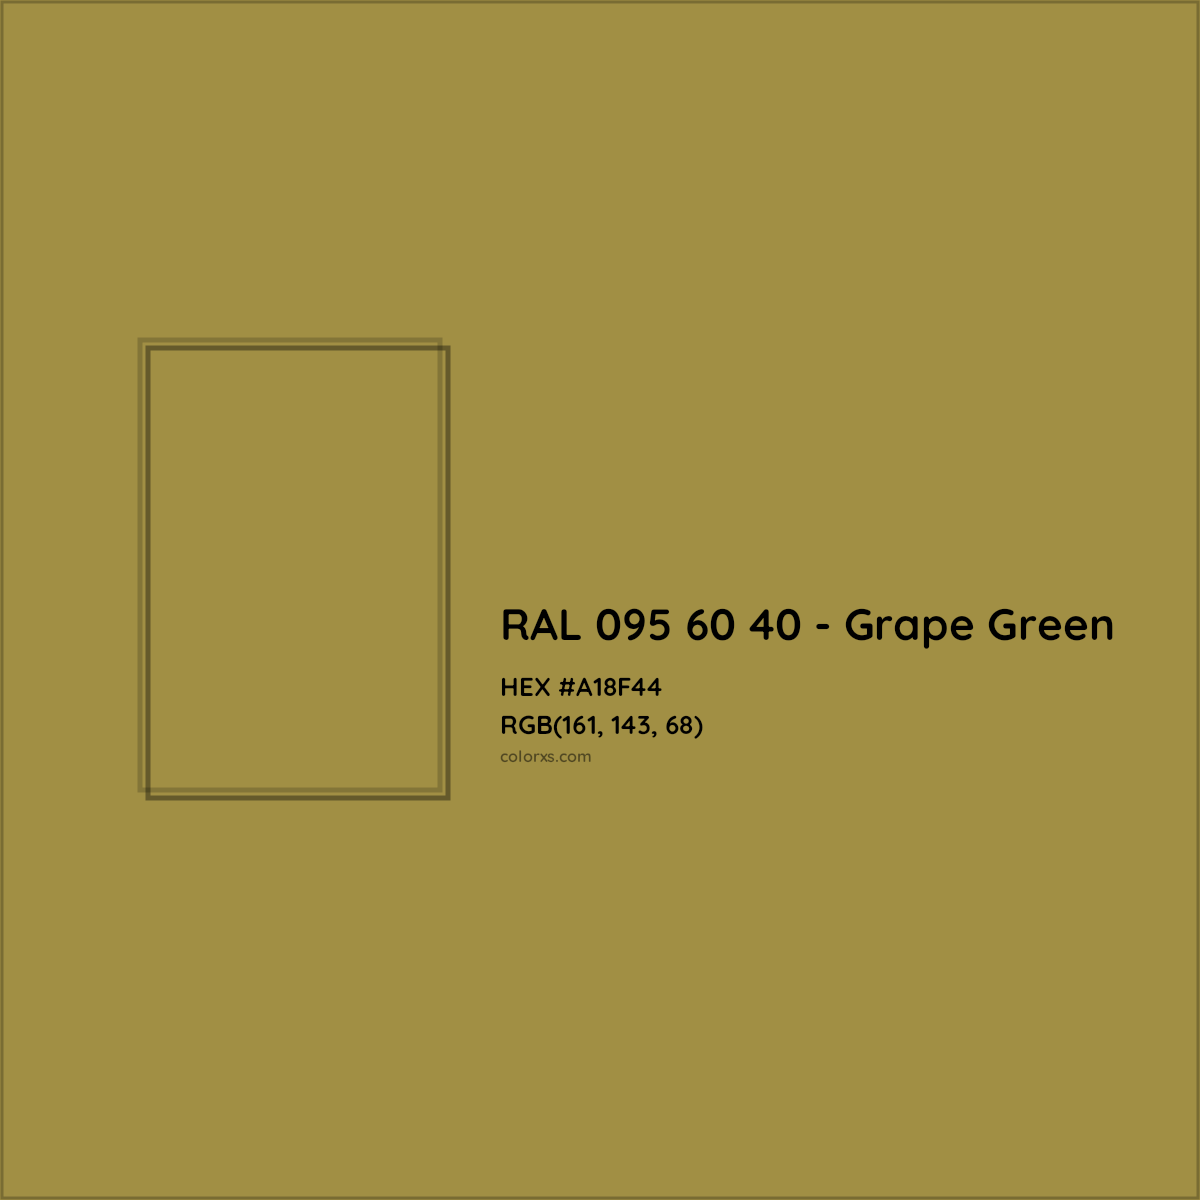 HEX #A18F44 RAL 095 60 40 - Grape Green CMS RAL Design - Color Code